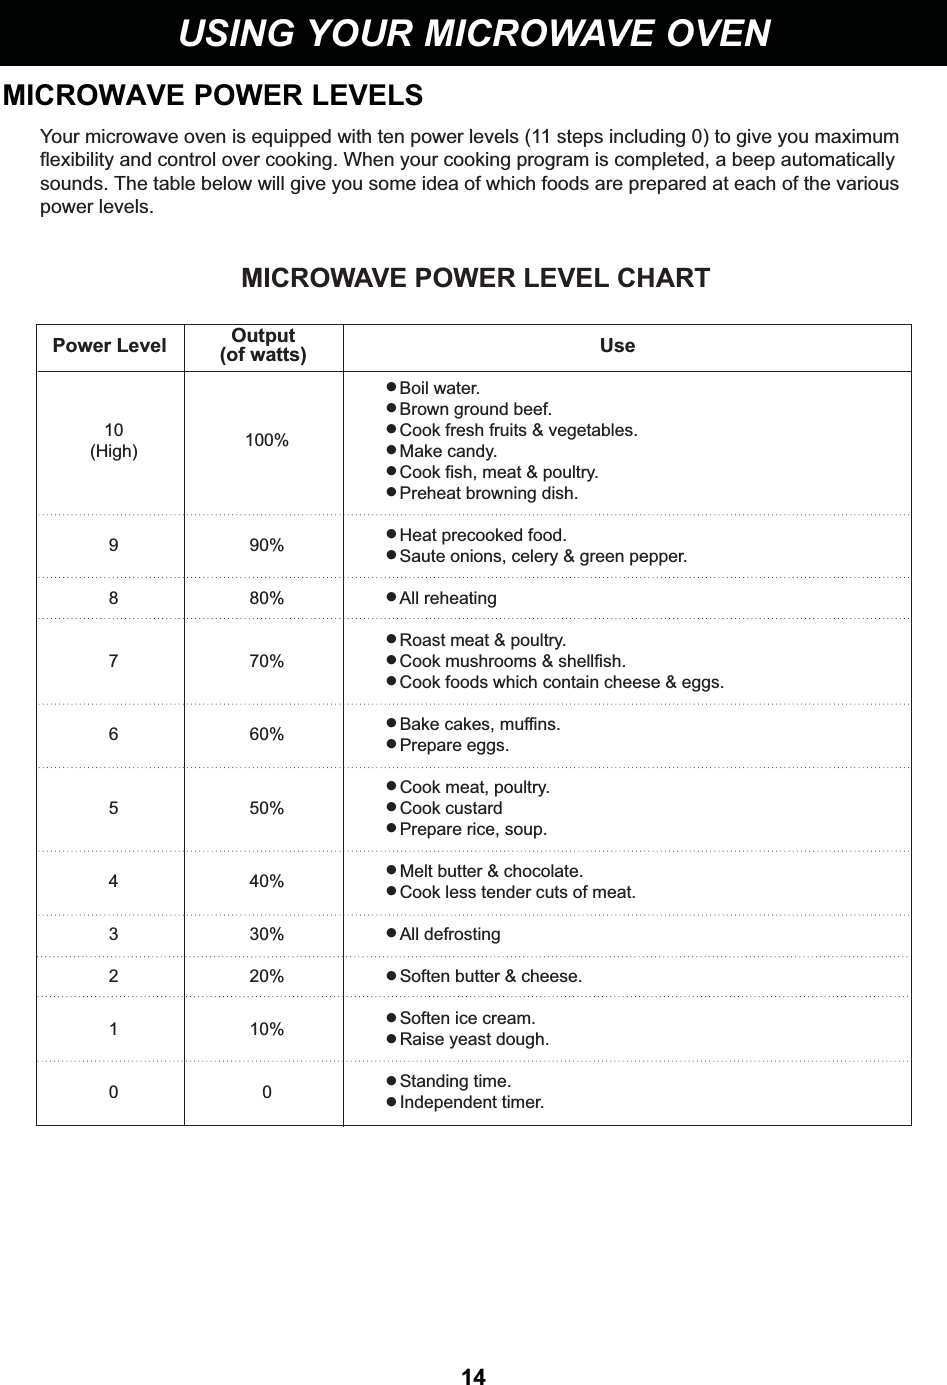 14USING YOUR MICROWAVE OVENMICROWAVE POWER LEVELSYour microwave oven is equipped with ten power levels (11 steps including 0) to give you maximumflexibility and control over cooking. When your cooking program is completed, a beep automaticallysounds. The table below will give you some idea of which foods are prepared at each of the variouspower levels.MICROWAVE POWER LEVEL CHART Power Level Use● Boil water.● Brown ground beef.10 100% ● Cook fresh fruits &amp; vegetables.(High) ● Make candy.● Cook fish, meat &amp; poultry.● Preheat browning dish.9 90% ● Heat precooked food.● Saute onions, celery &amp; green pepper.8 80% ● All reheating● Roast meat &amp; poultry.7 70% ● Cook mushrooms &amp; shellfish.● Cook foods which contain cheese &amp; eggs.6 60% ● Bake cakes, muffins.● Prepare eggs.● Cook meat, poultry.5 50% ● Cook custard● Prepare rice, soup.4 40% ● Melt butter &amp; chocolate.● Cook less tender cuts of meat.3 30% ● All defrosting2 20% ● Soften butter &amp; cheese.1 10% ● Soften ice cream.● Raise yeast dough.00● Standing time.● Independent timer.Output (of watts)